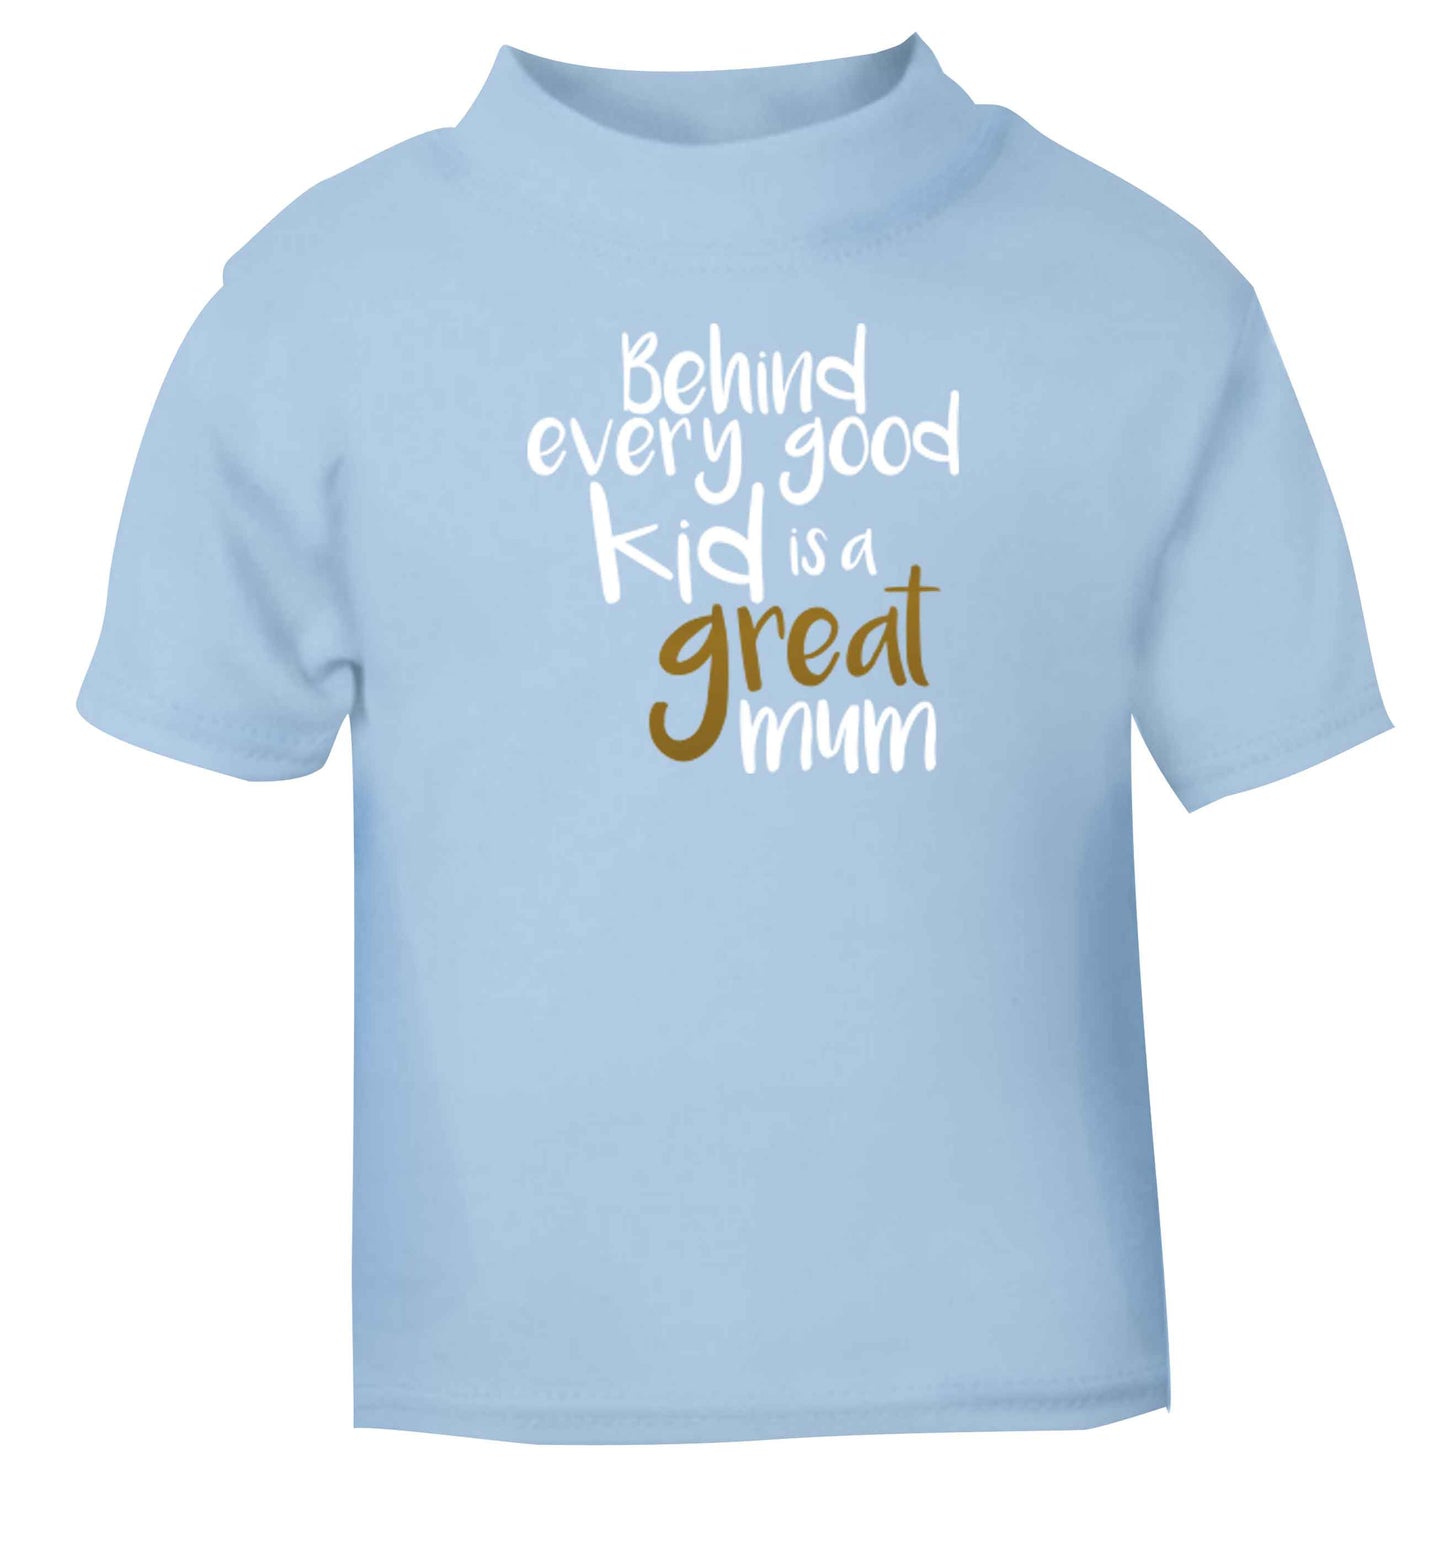 Behind every good kid is a great mum light blue baby toddler Tshirt 2 Years